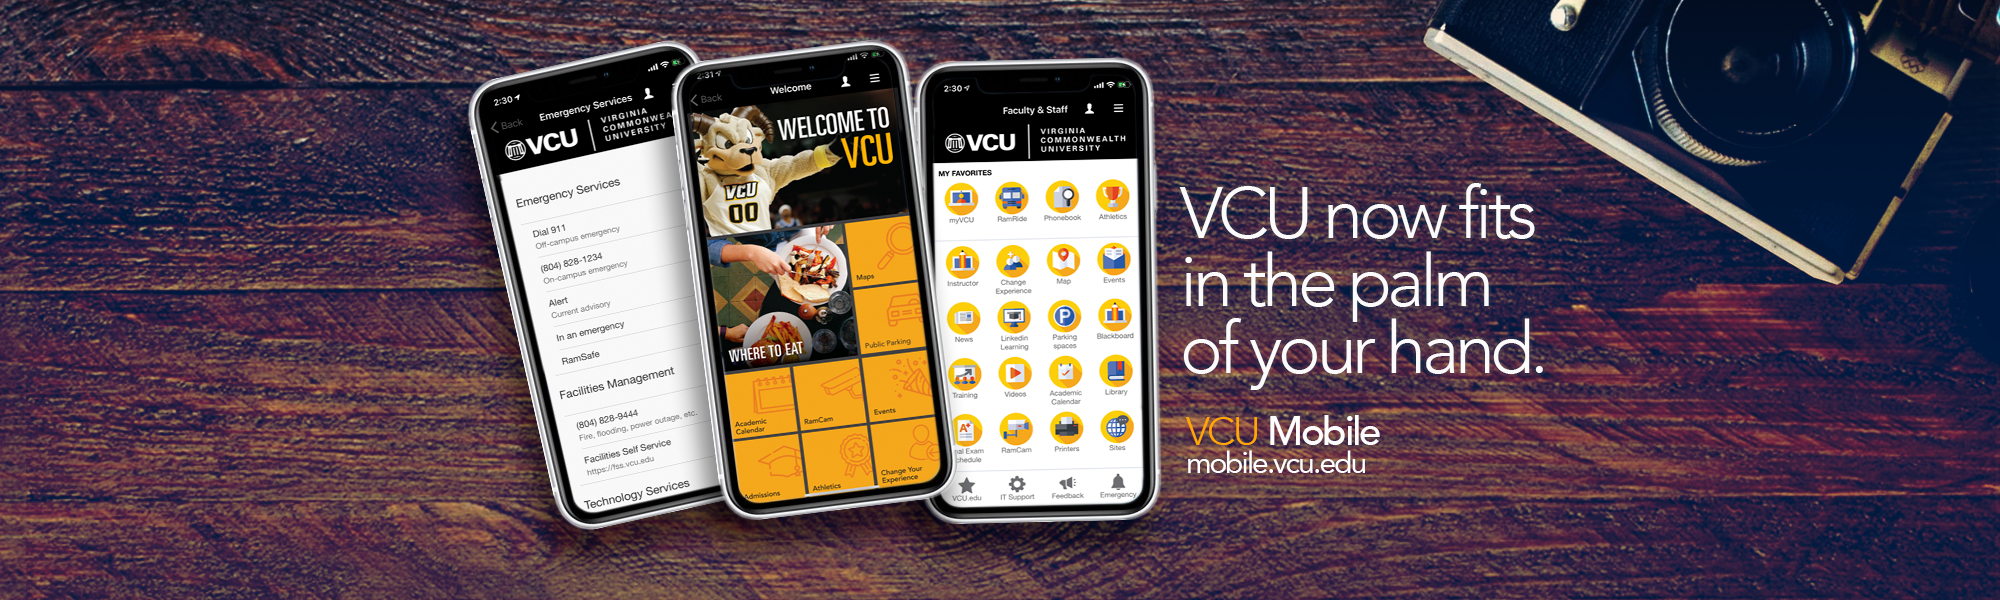 VCU now fits in the palm of your hand. mobile.vcu.edu